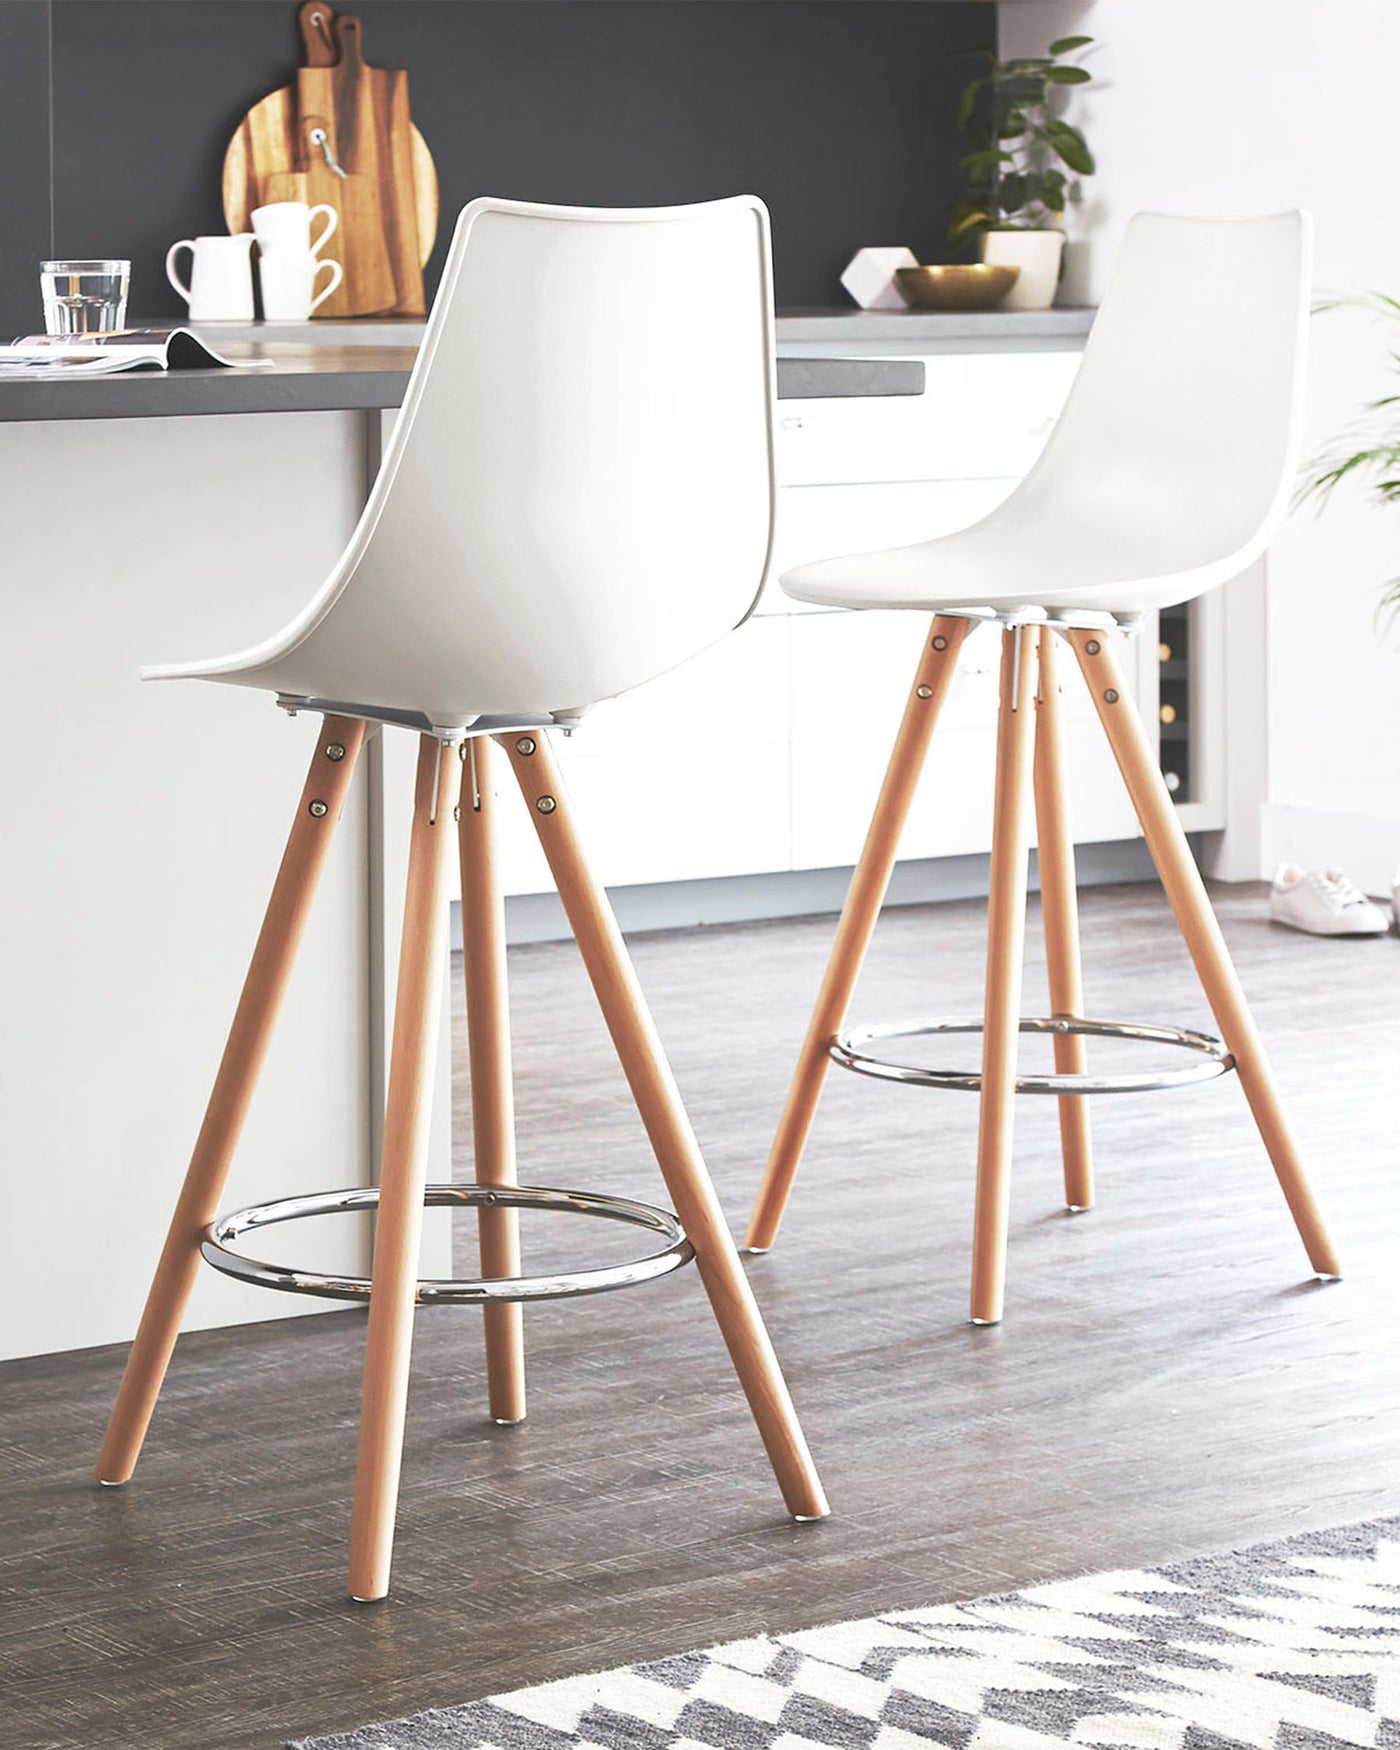 Two modern Scandinavian style bar stools with white plastic seats and wooden legs with metallic accents. Each stool features a low back design and a metal footrest circle. The stools are positioned in a bright kitchen with a subtle contemporary aesthetic.